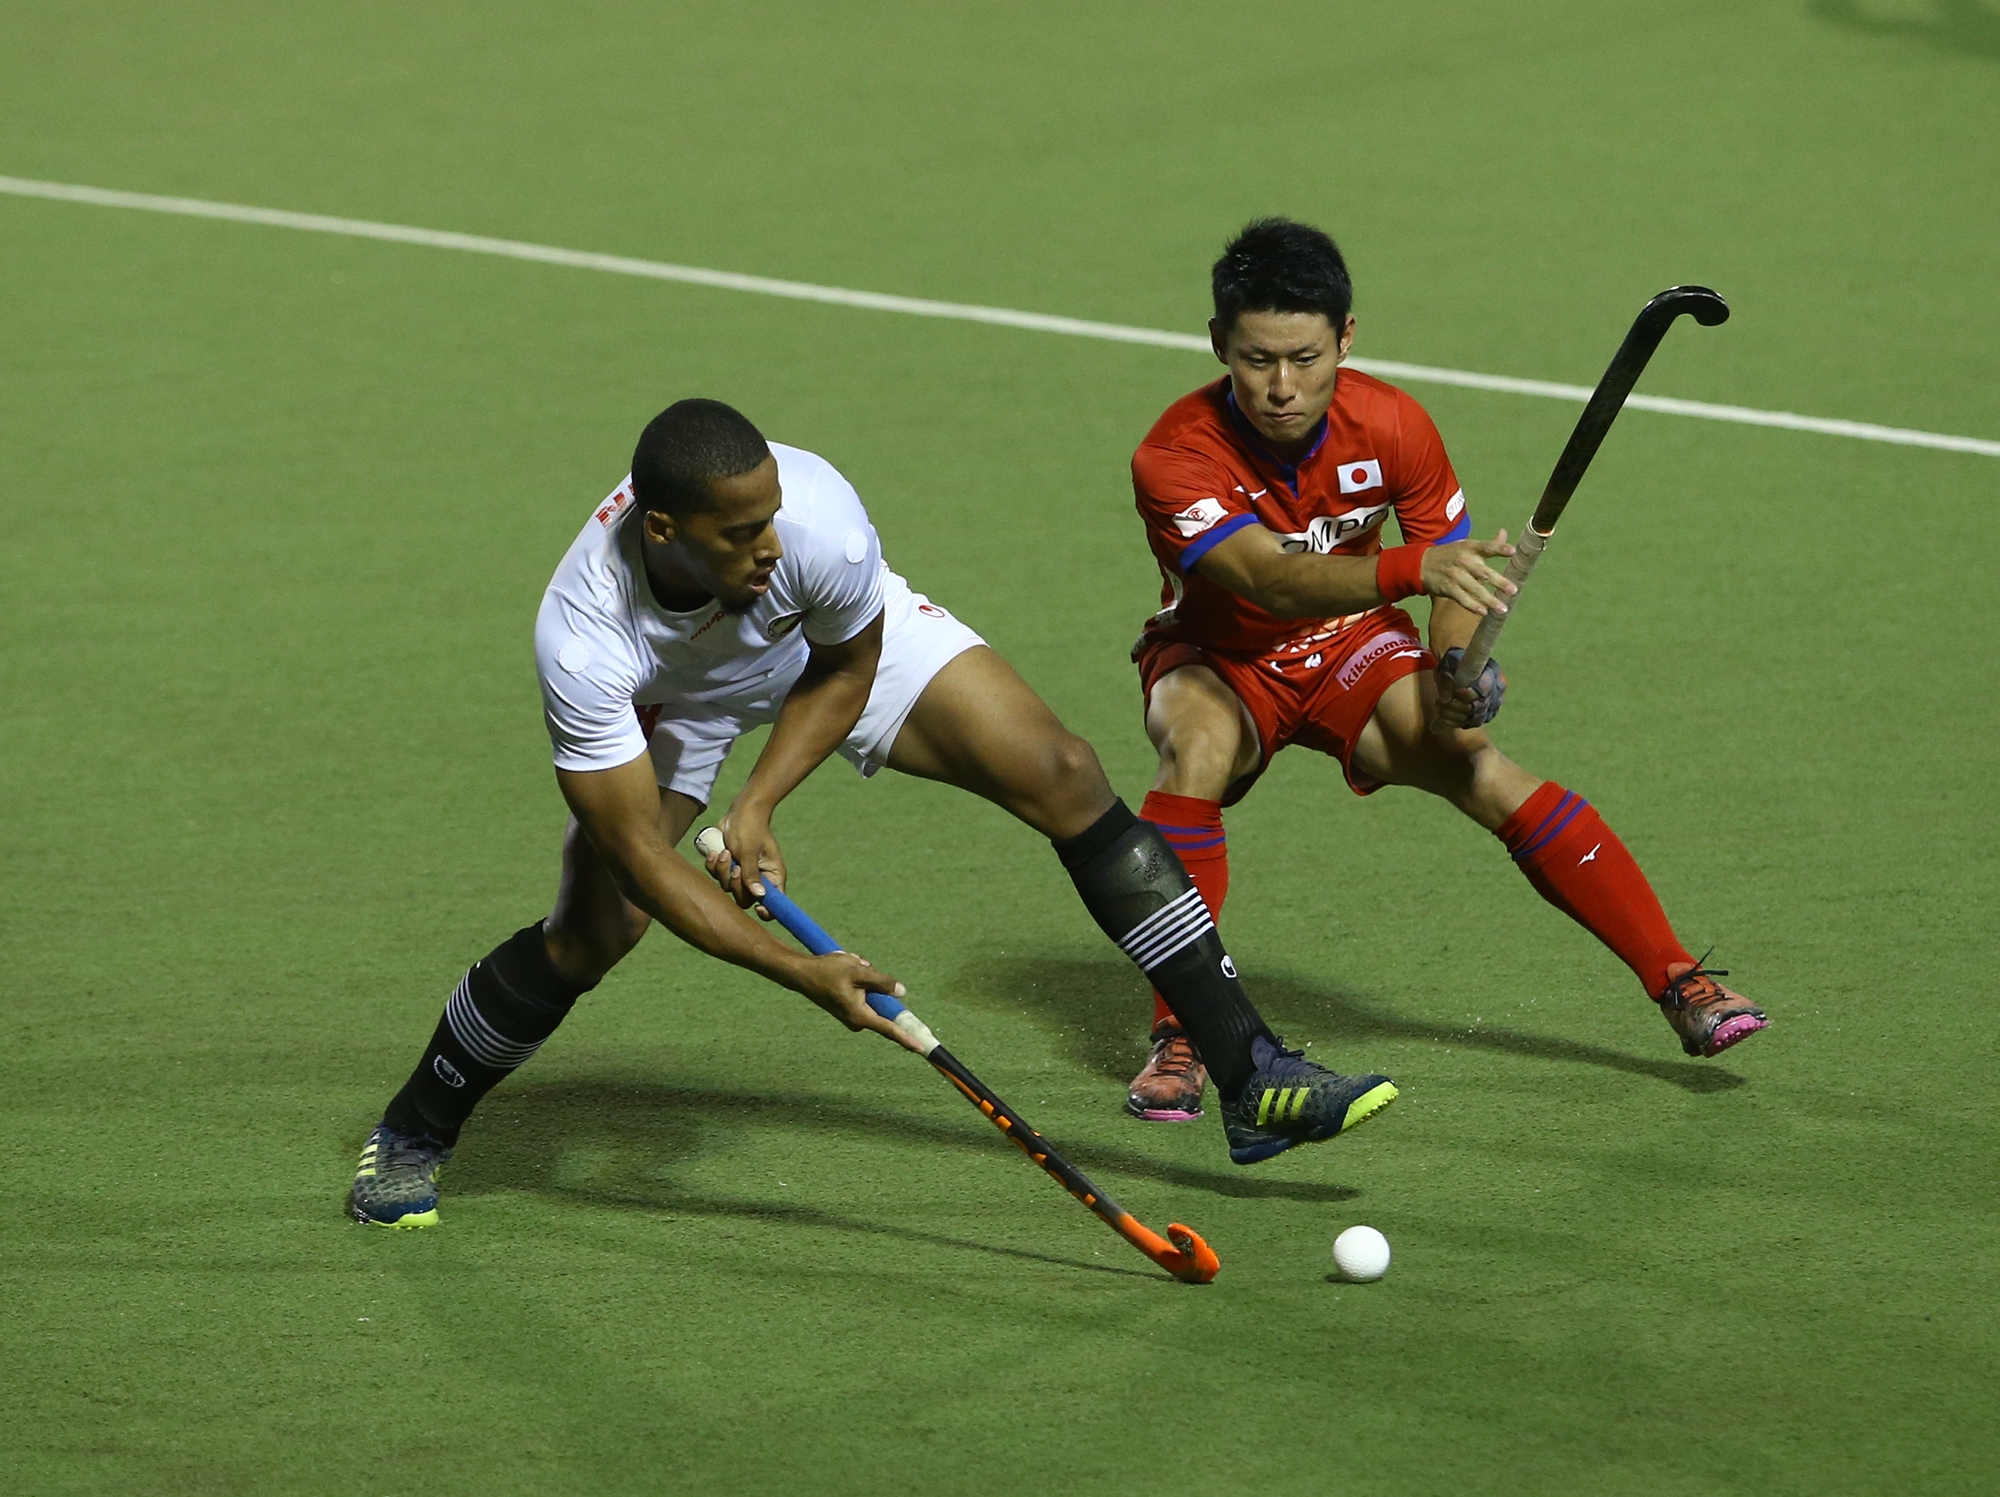 Hockey: India to face Japan, Malaysia to play Pakistan in Asian Champions Trophy semis